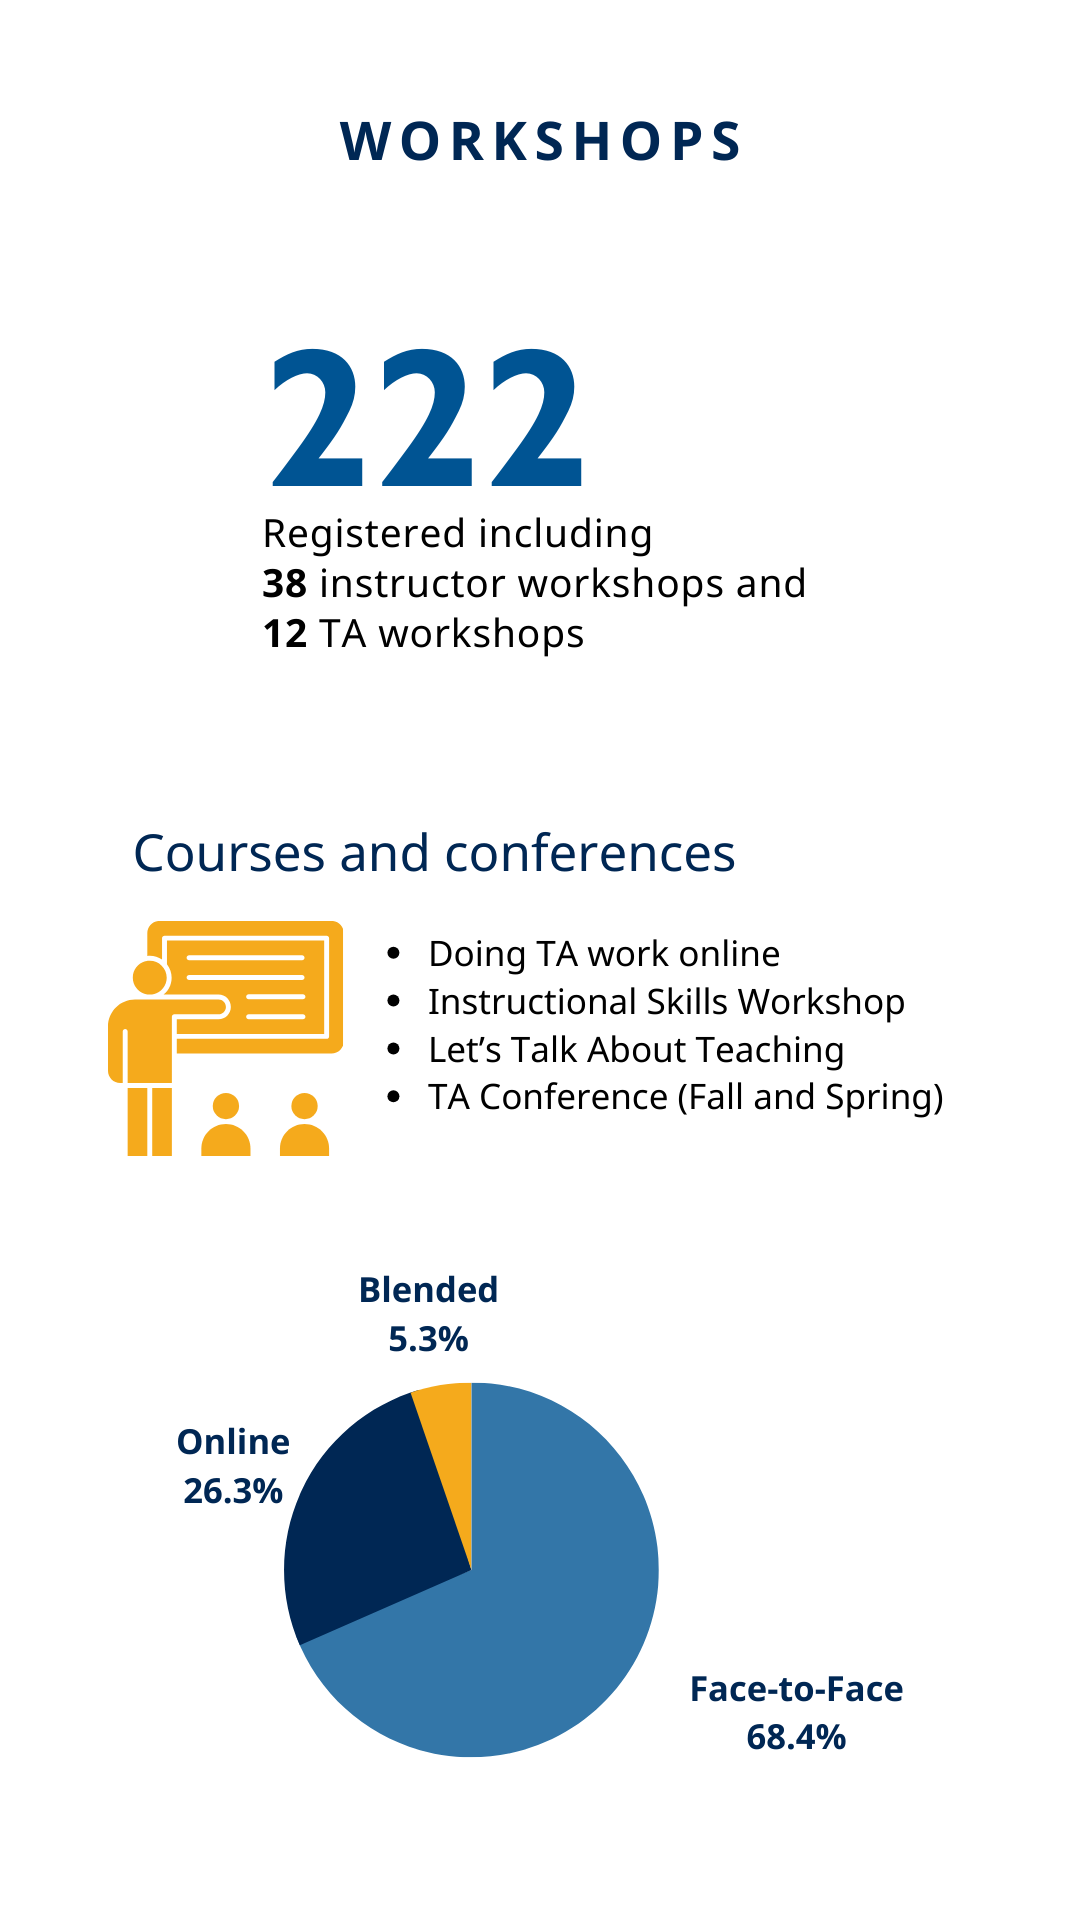 A graphic titled 'WORKSHOPS' with a number '222' in large font. Below it, an icon represents courses and conferences. To the right, a pie chart details the modes of delivery for workshops: 68.4% face-to-face, 26.3% online, and 5.3% blended.